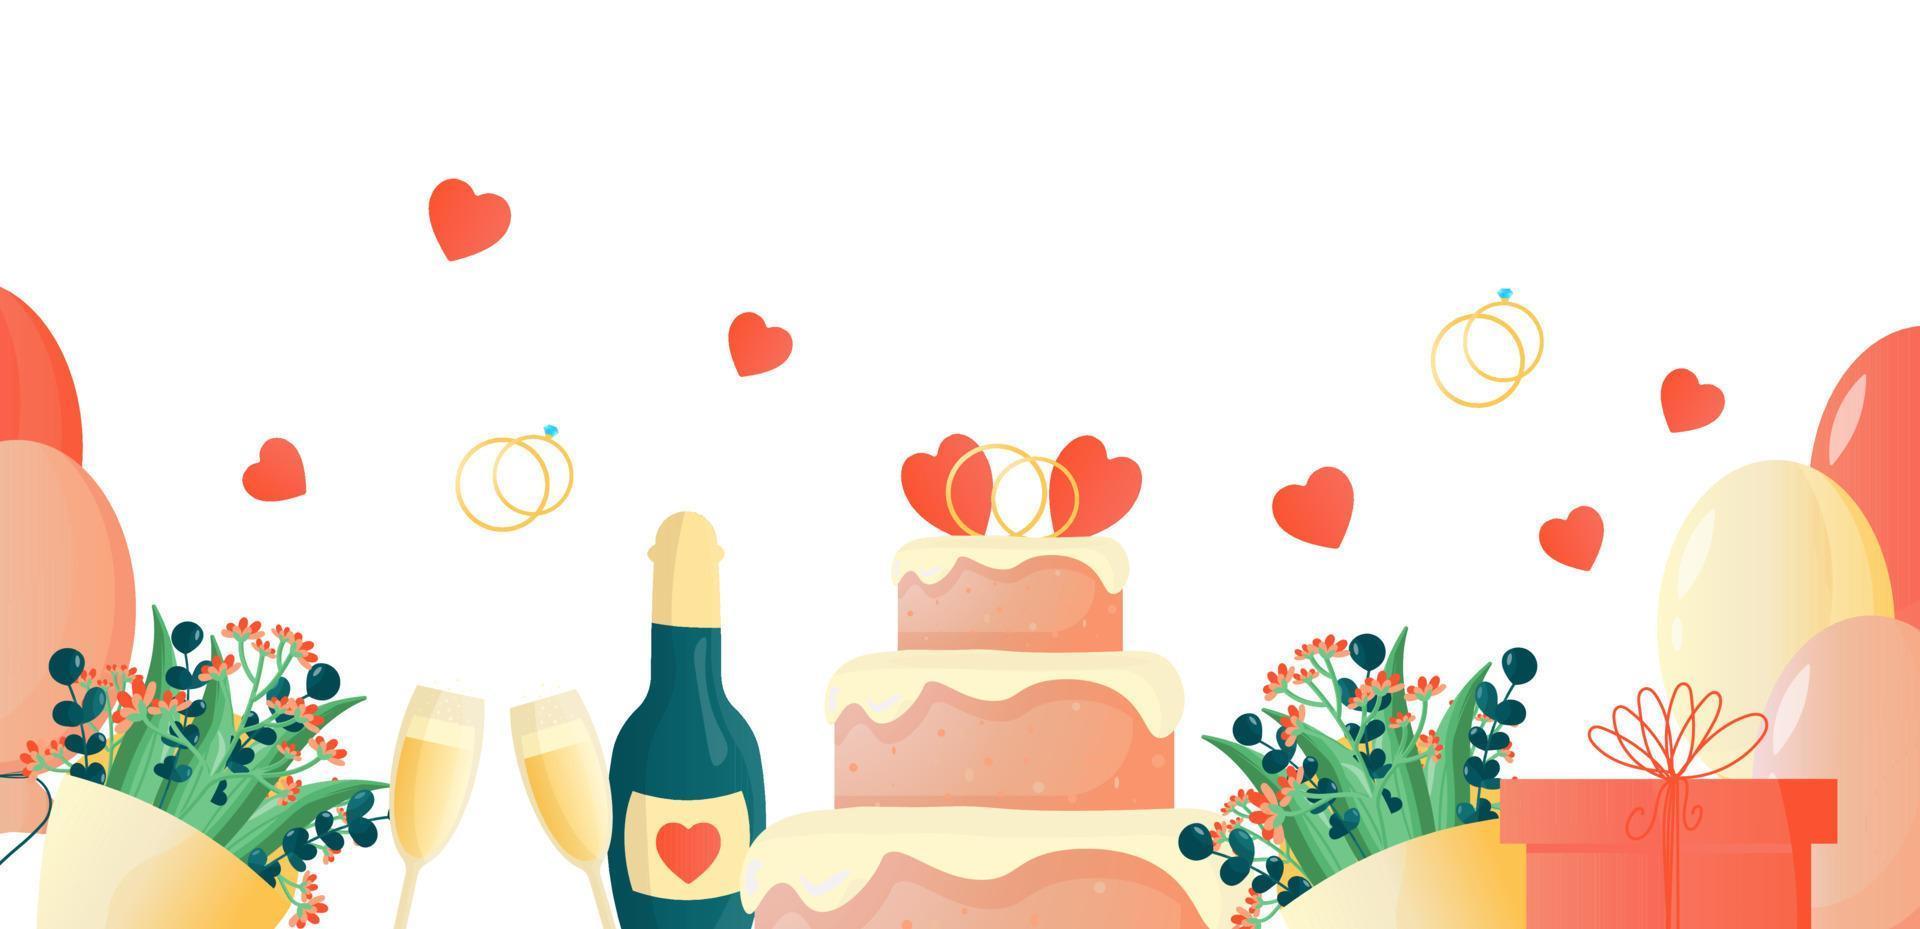 Beautiful background for the wedding ceremony. A festive set of glasses with a bottle of champagne, cake, rings, bouquet of flowers, gift. Vector simple cute illustration for poster, banner, design.